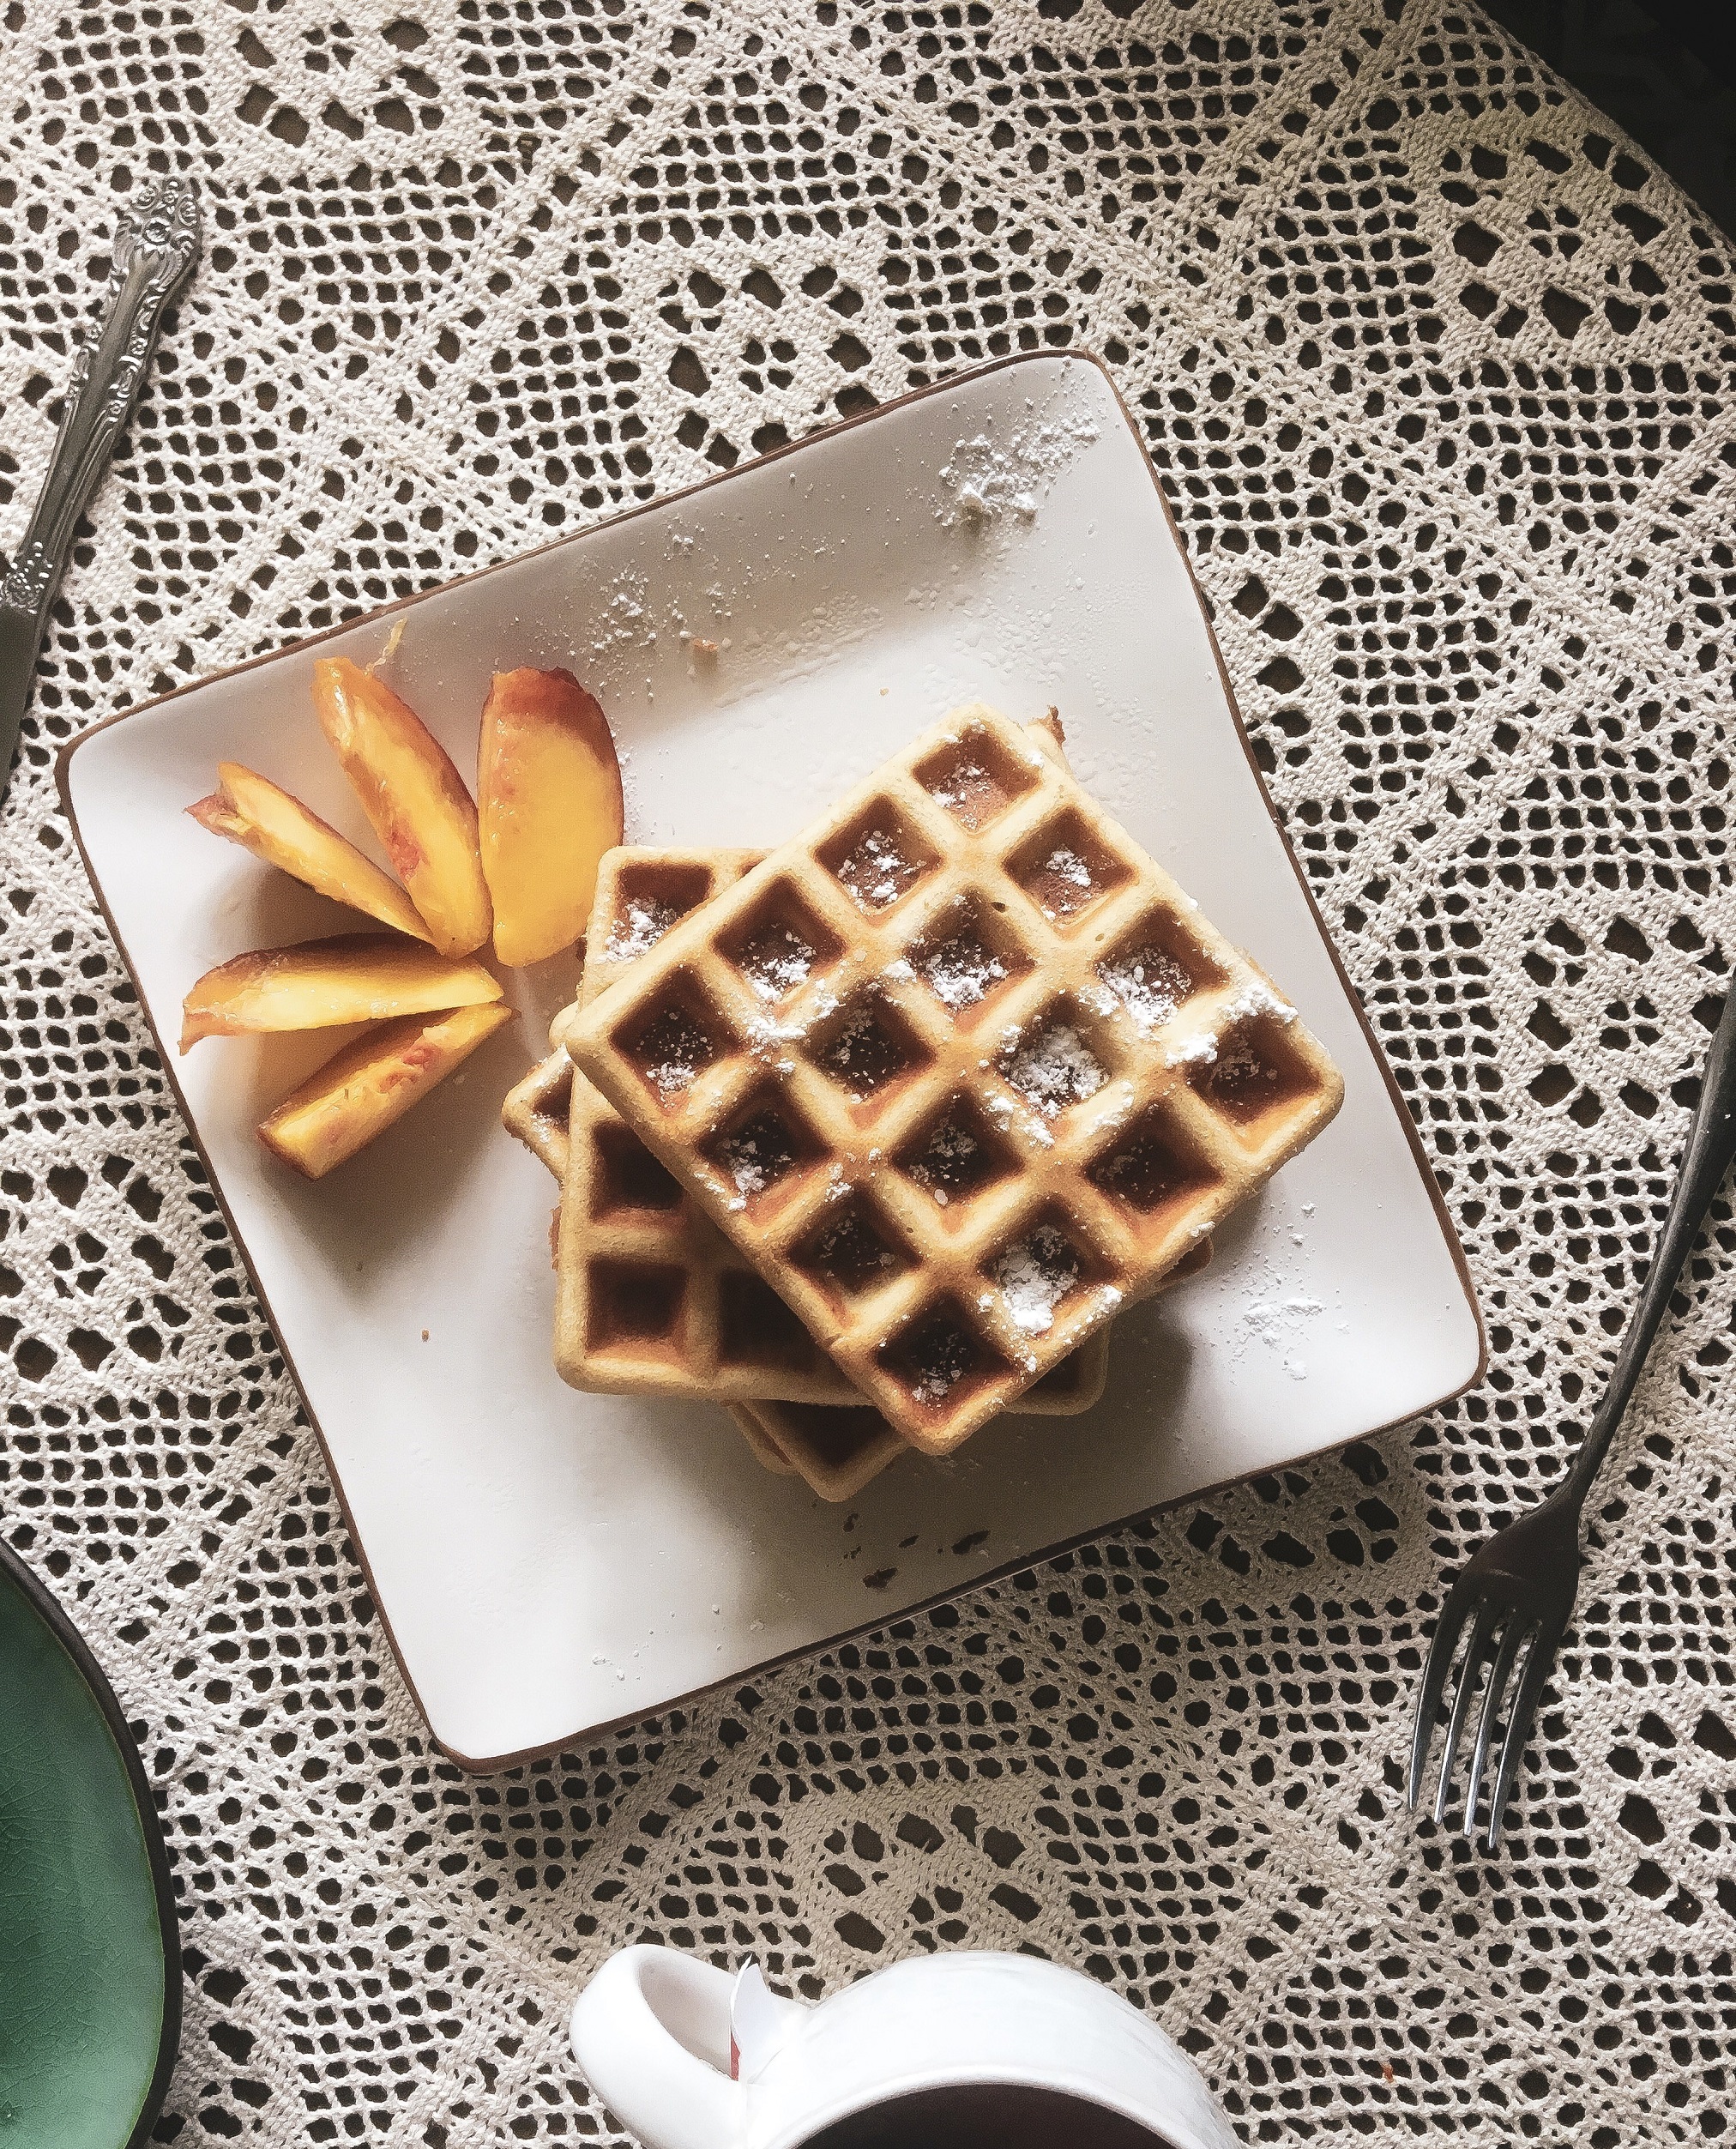 Viennese waffles with cinnamon